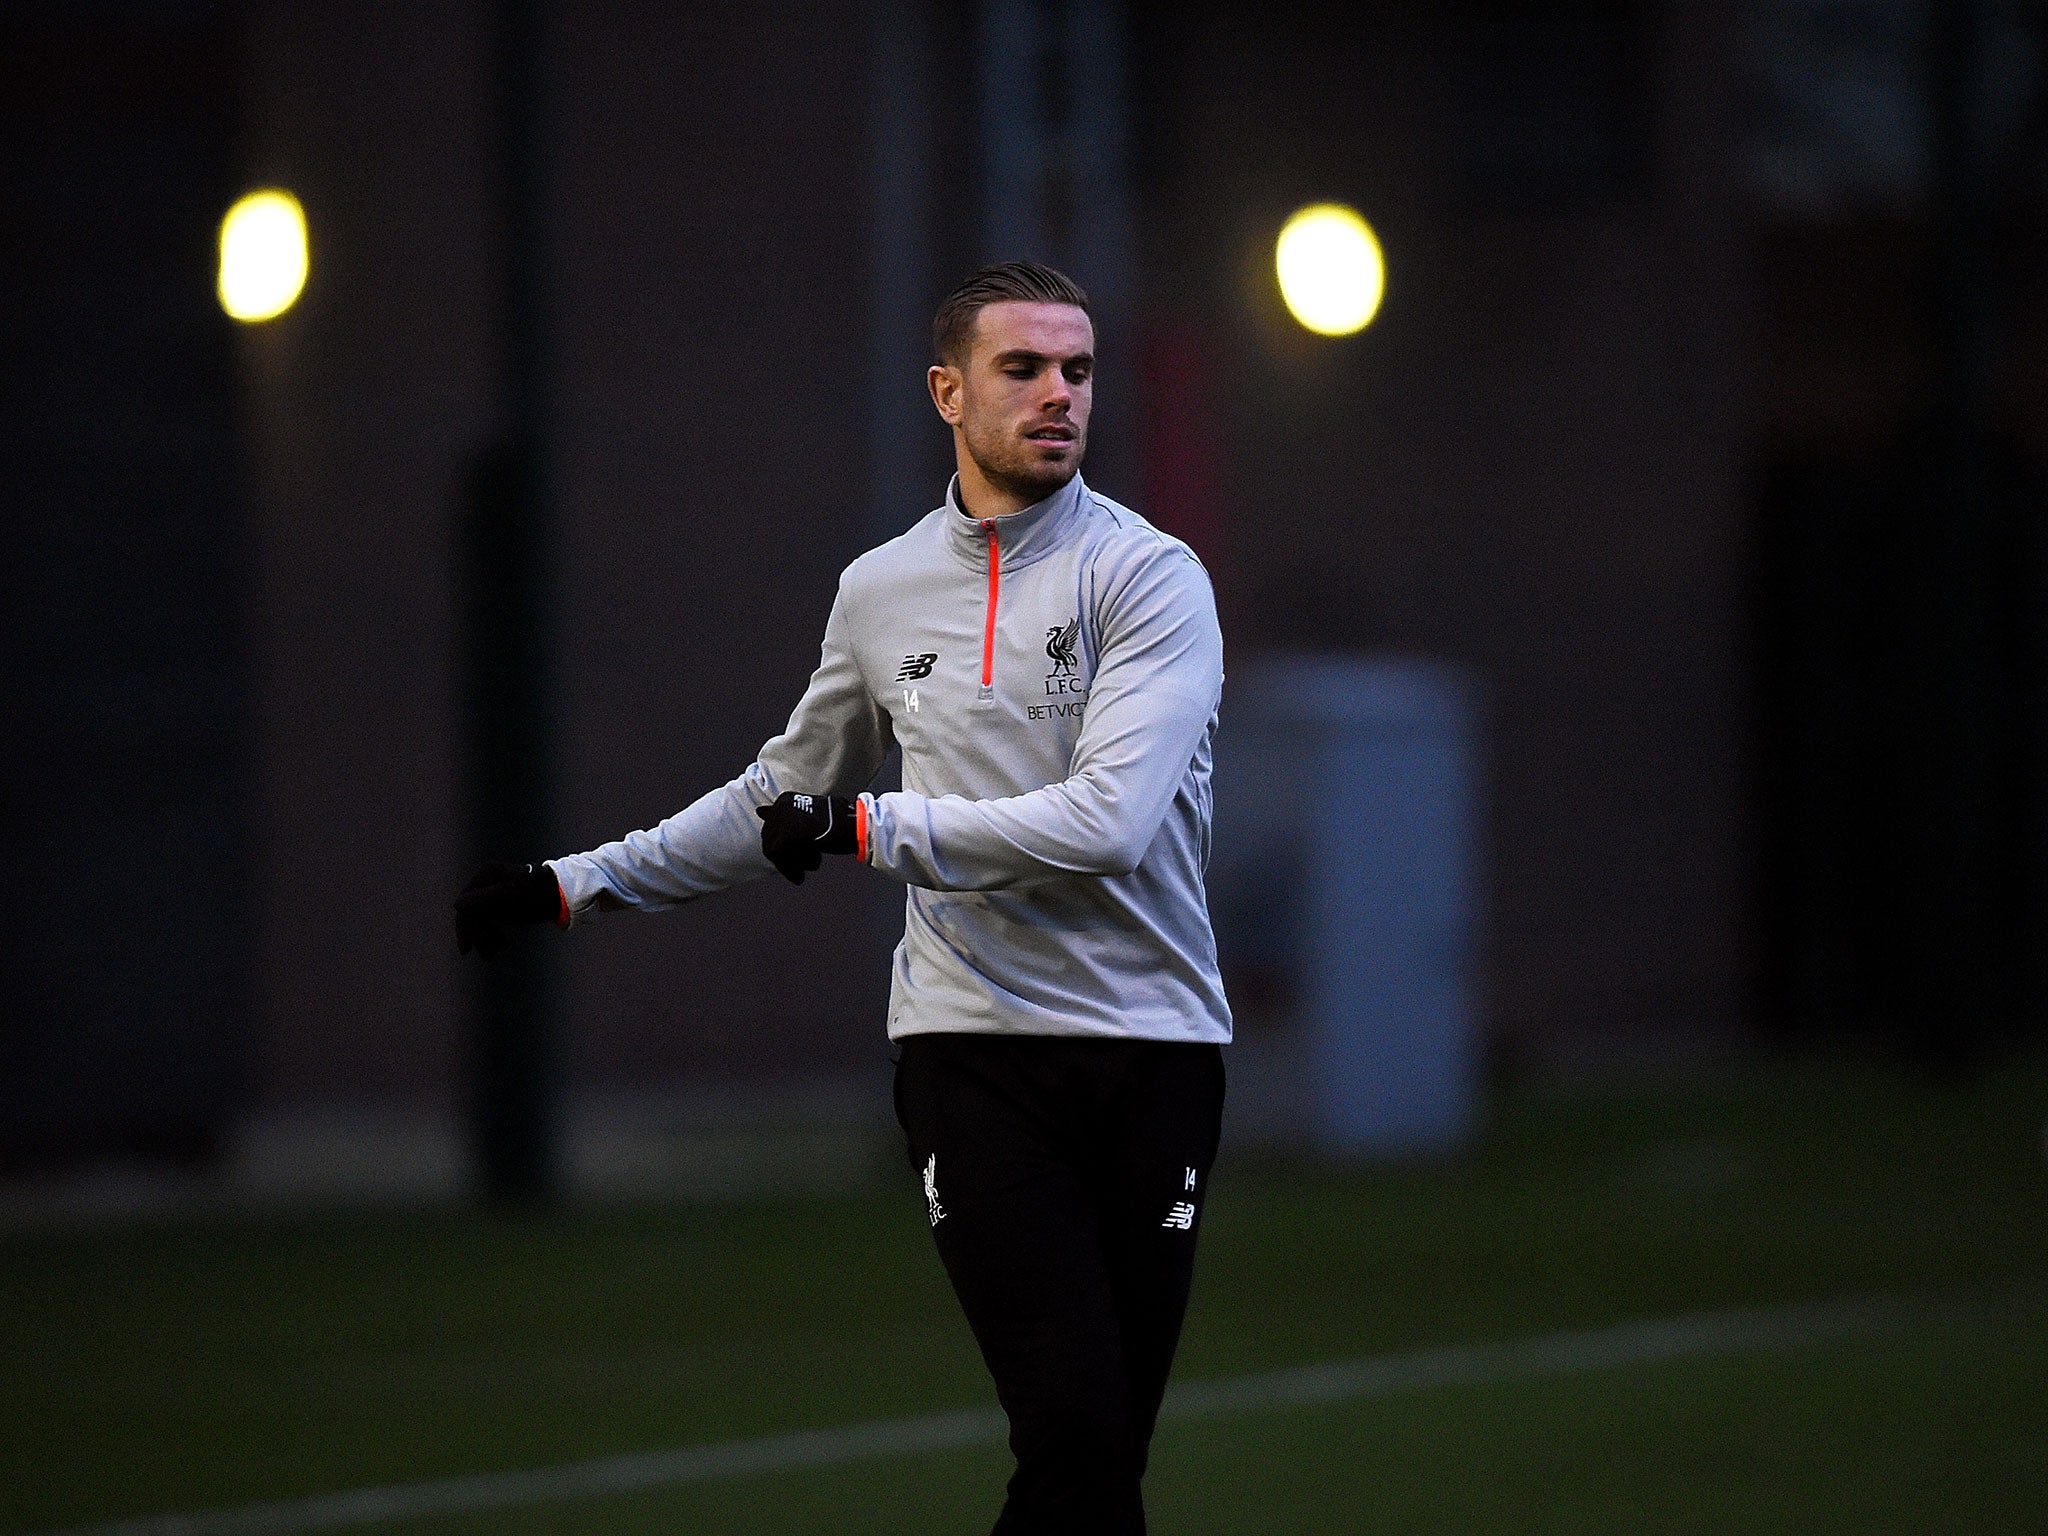 Jordan Henderson's injury has kept him out of the side since 11 February